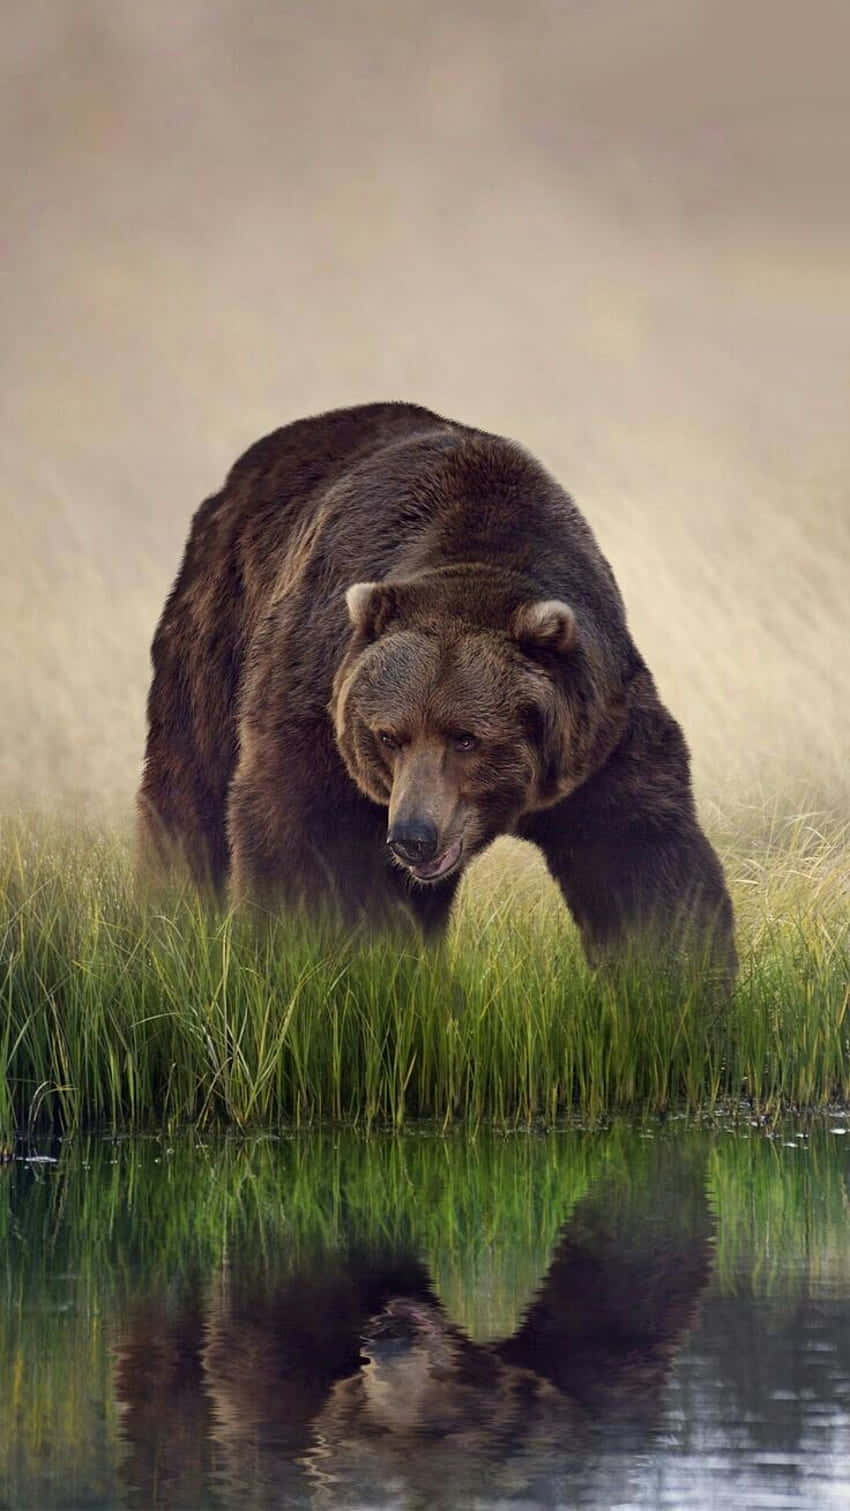 Grizzly Bear Approaching Water Reflection.jpg Background